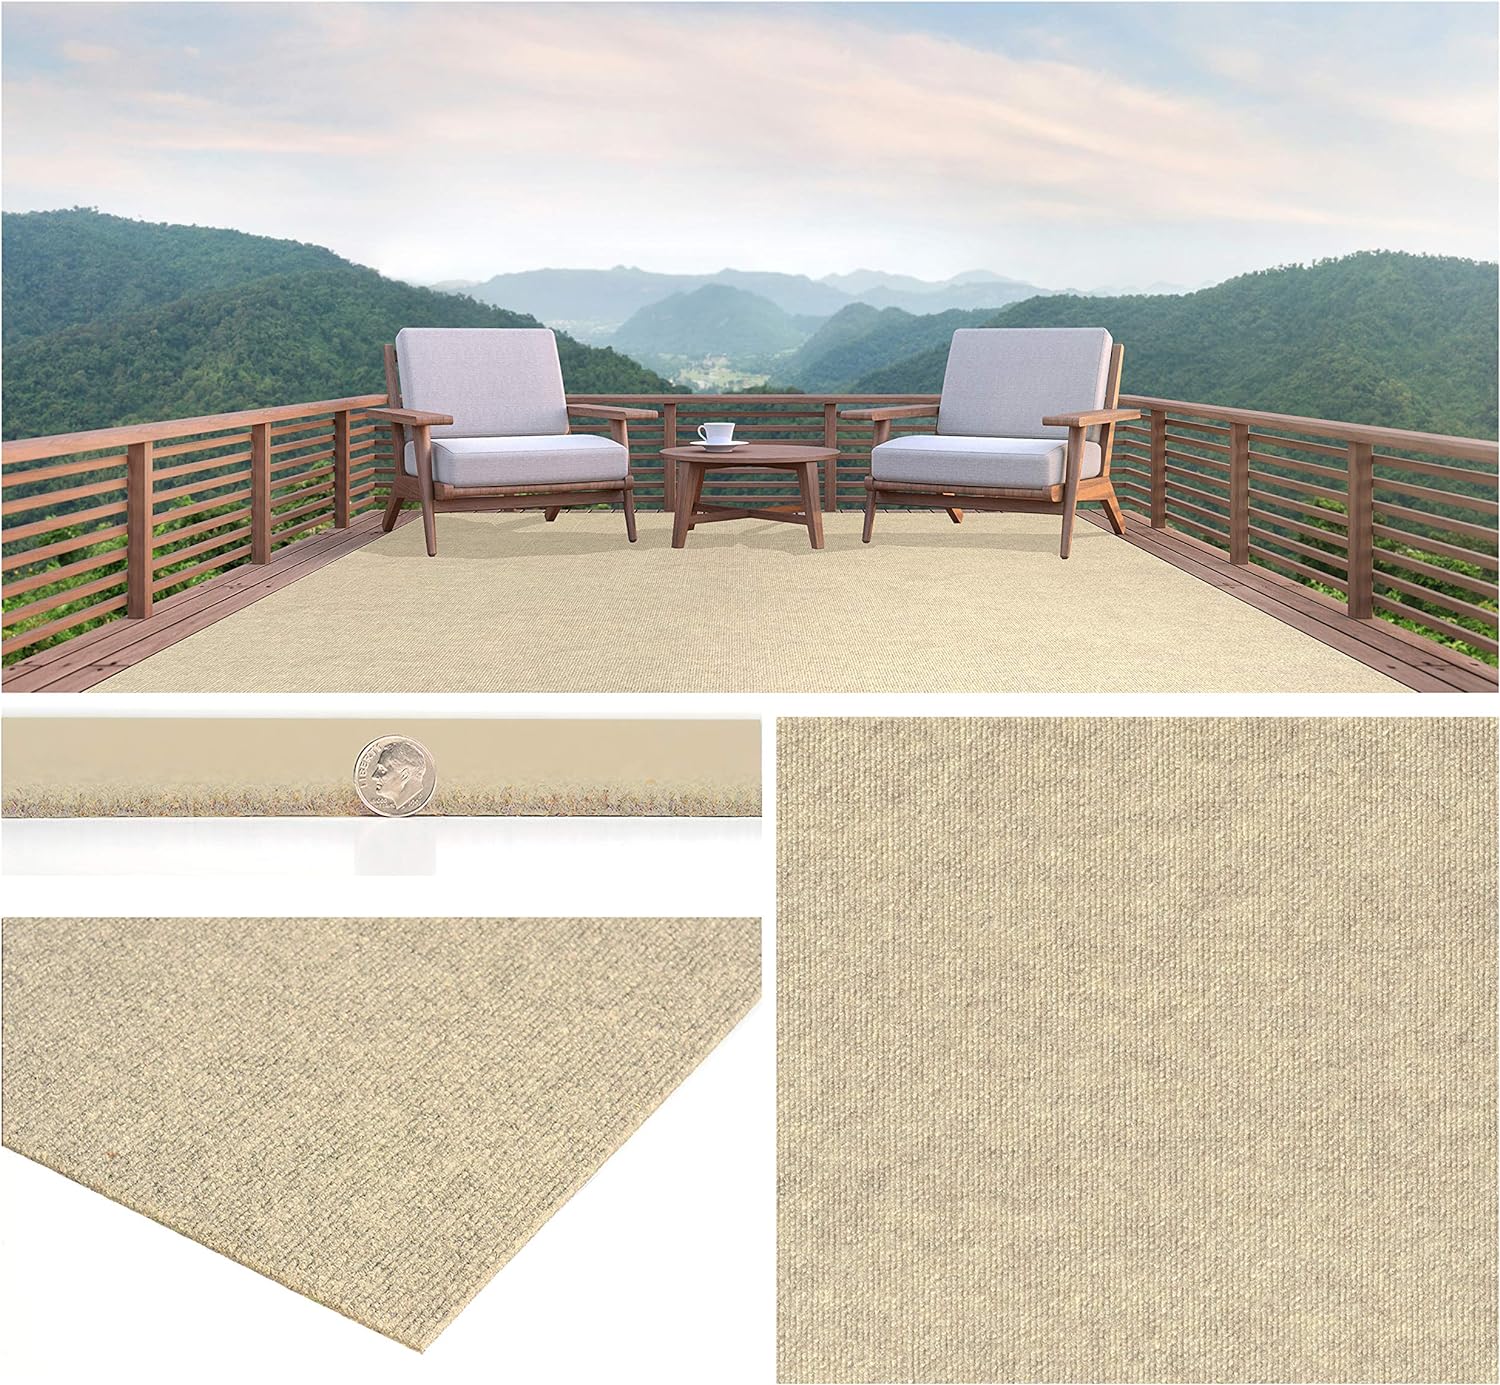 Koeckritz Rugs Durable Outdoor Area Rugs Constructed with Superior Soft PET Fiber (Color: Ivory) Made from 100% Purified Recycled Bottles